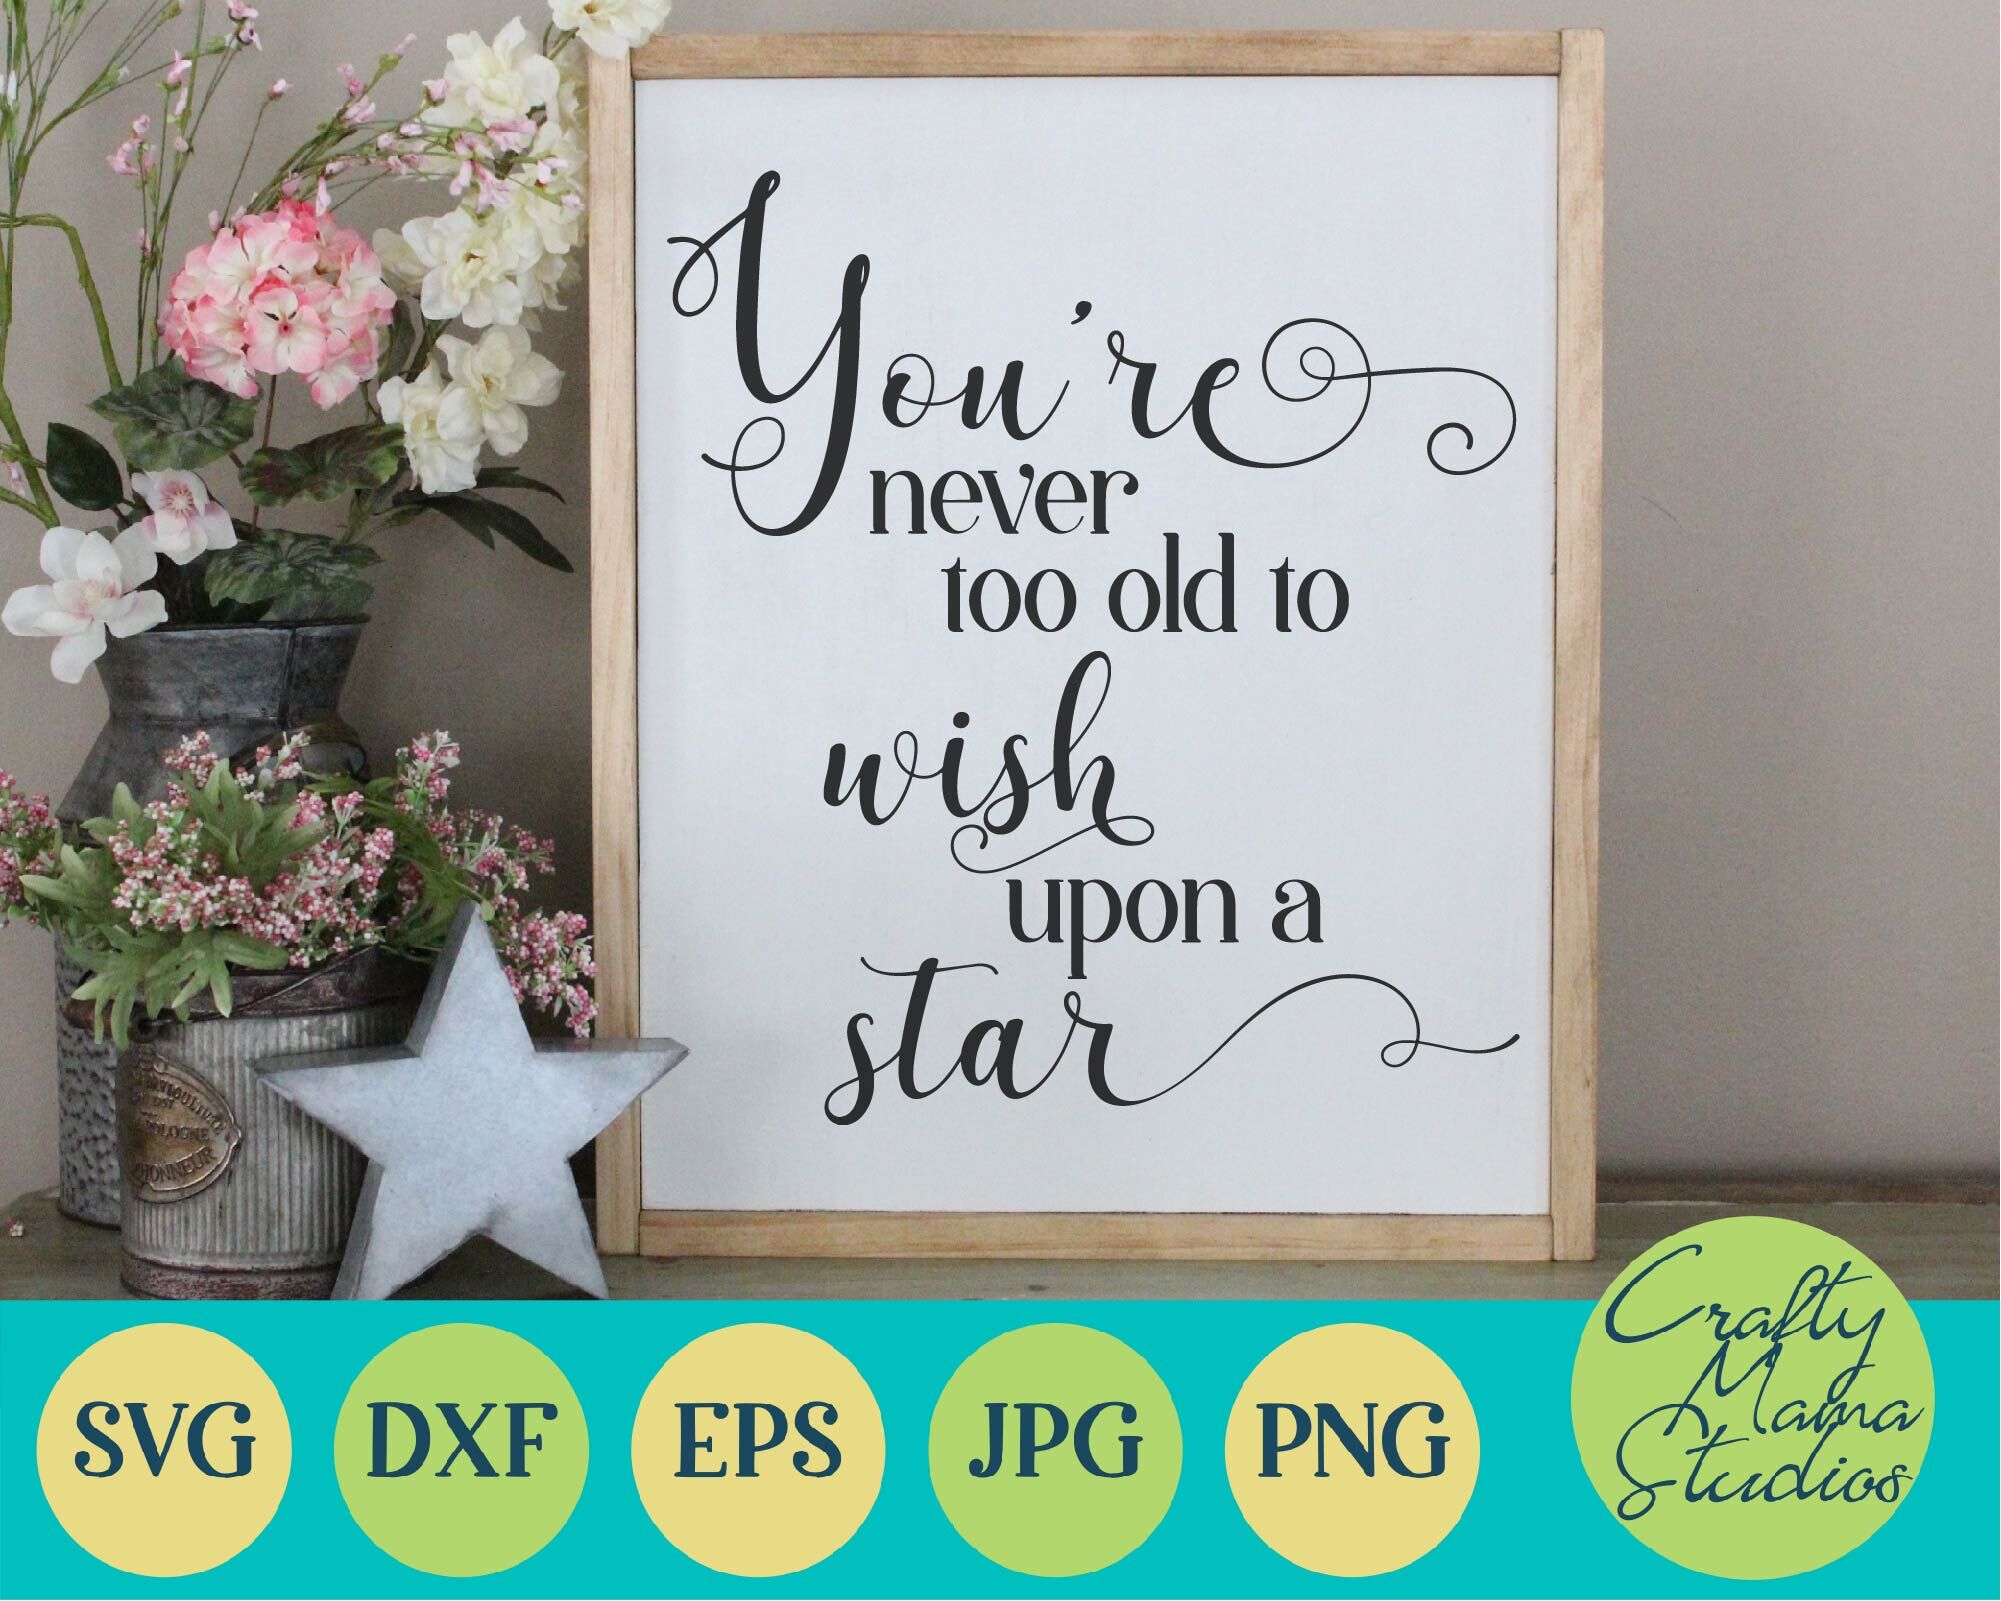 Never To Old Svg Wish Upon A Star Svg By Crafty Mama Studios Thehungryjpeg Com